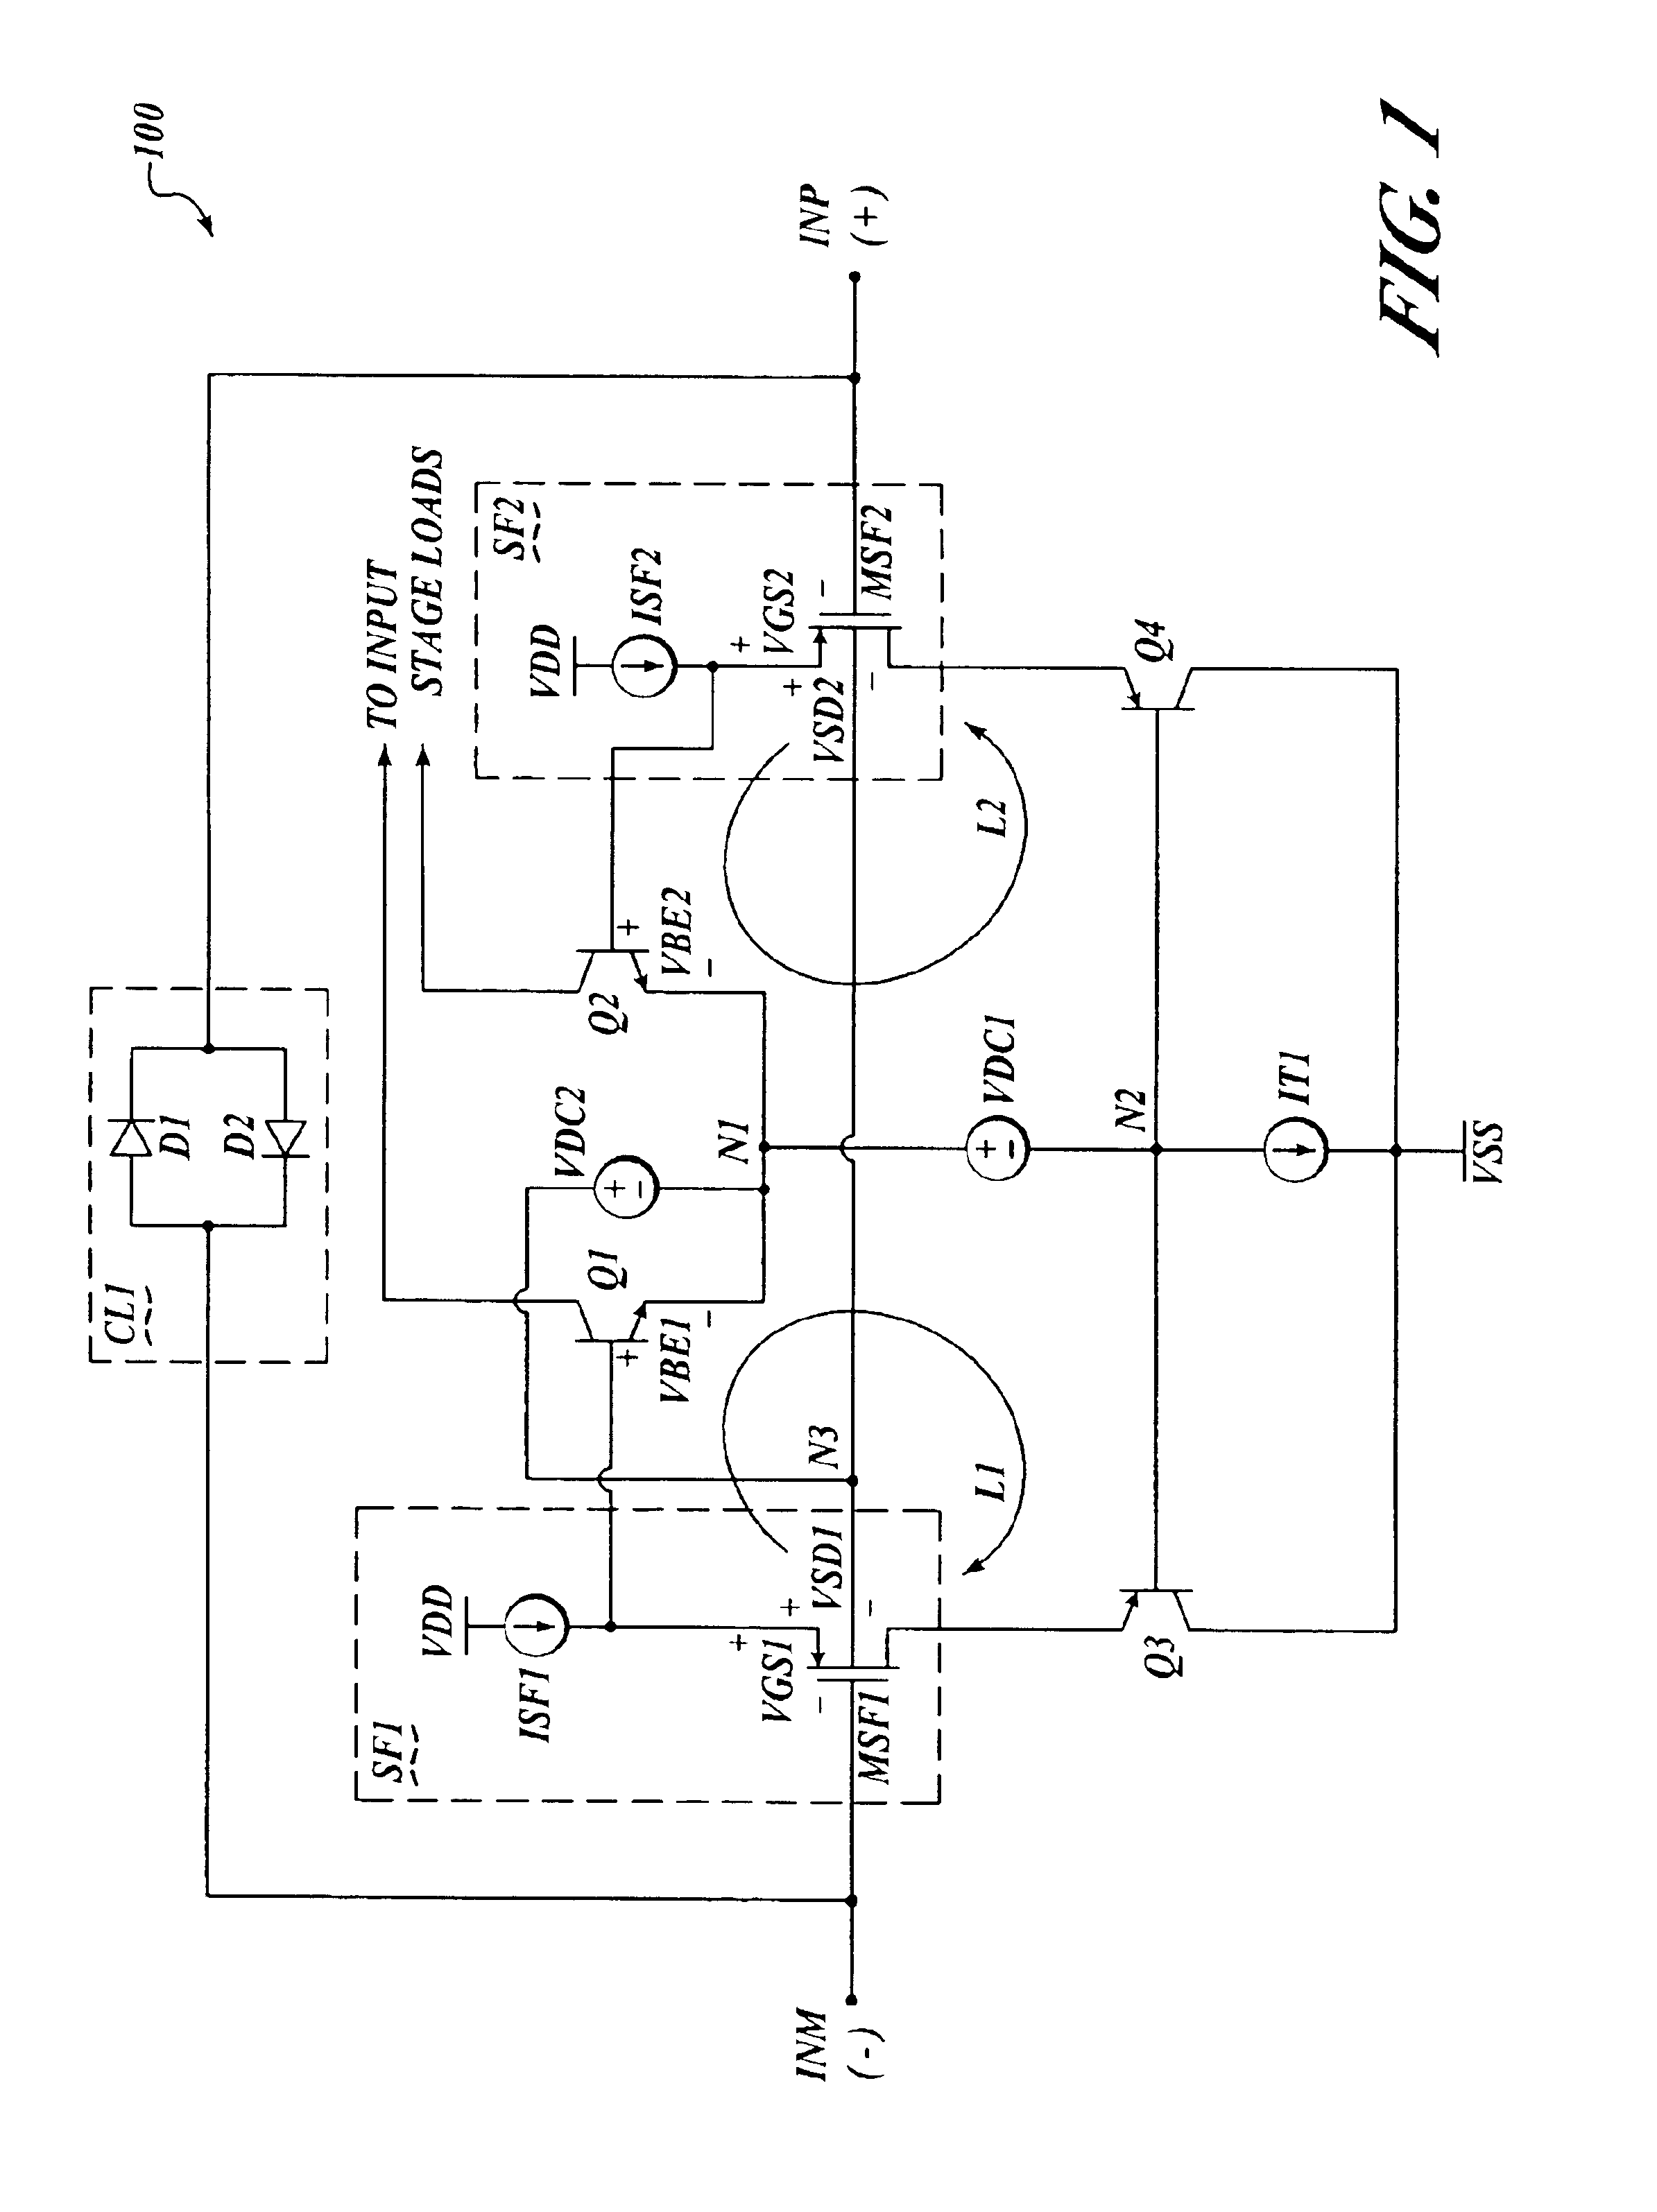 High voltage supply sensing high input resistance operational amplifier input stage